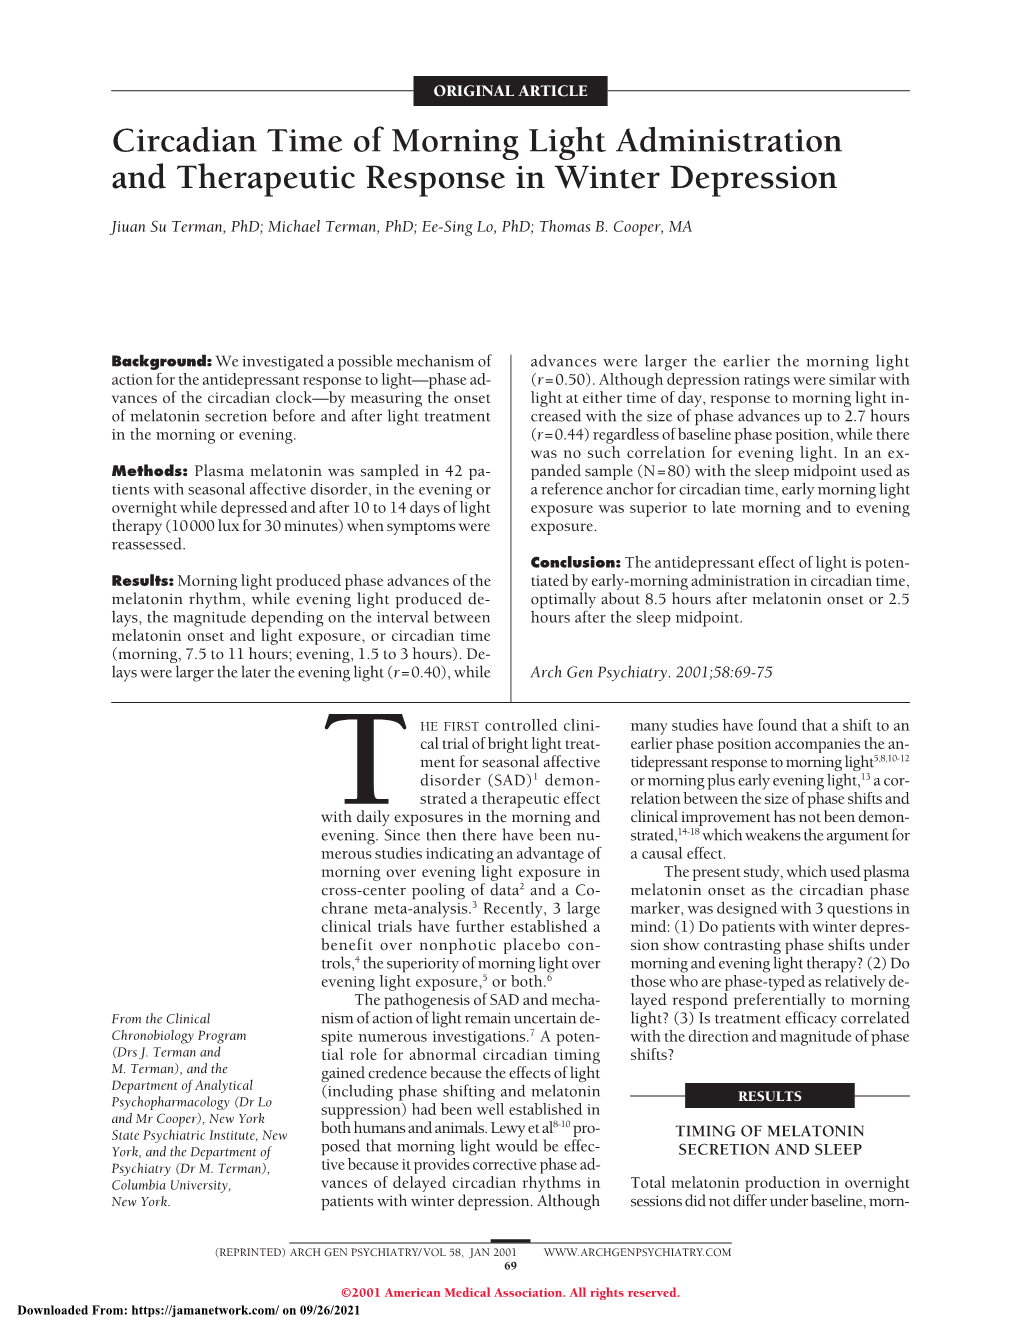 Circadian Time of Morning Light Administration and Therapeutic Response in Winter Depression